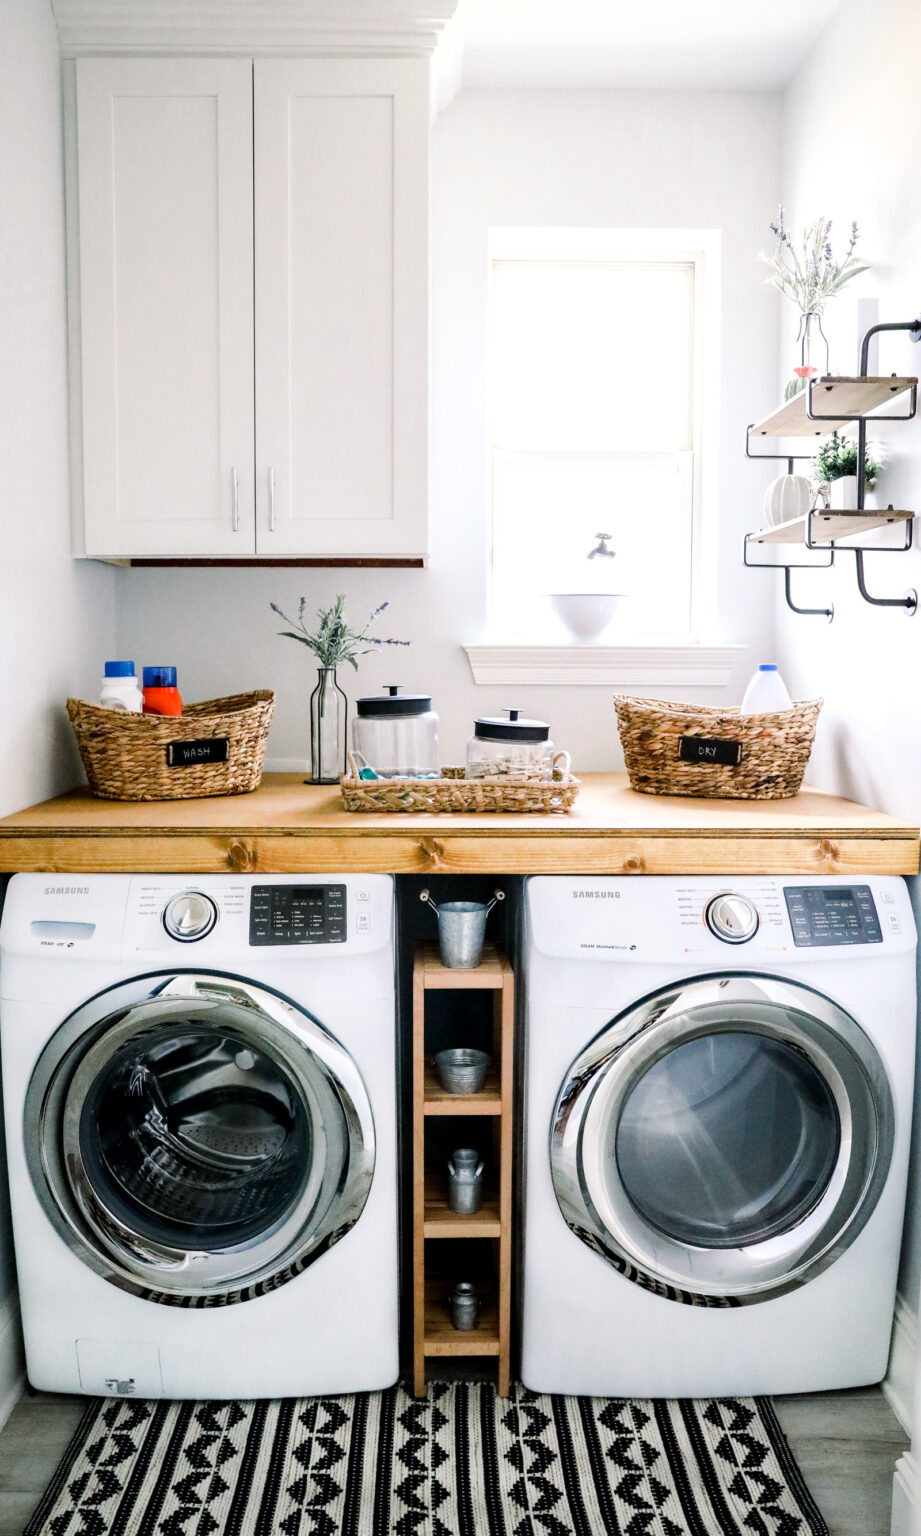 12 Amazing Farmhouse Ideas for the Laundry Room - City Girl Gone Mom